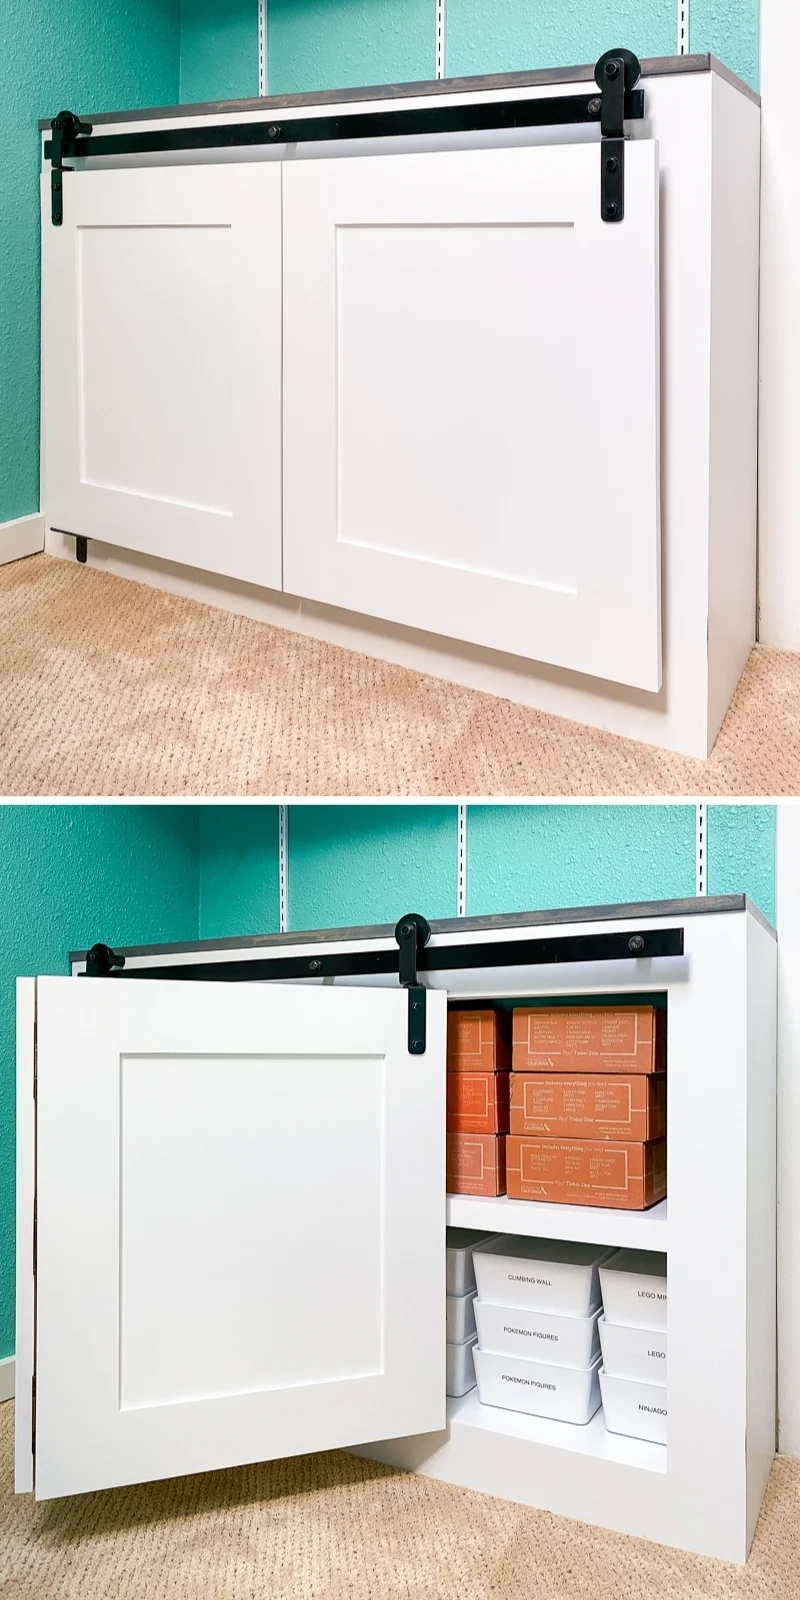 open and closed views of bifold barn doors on cabinet